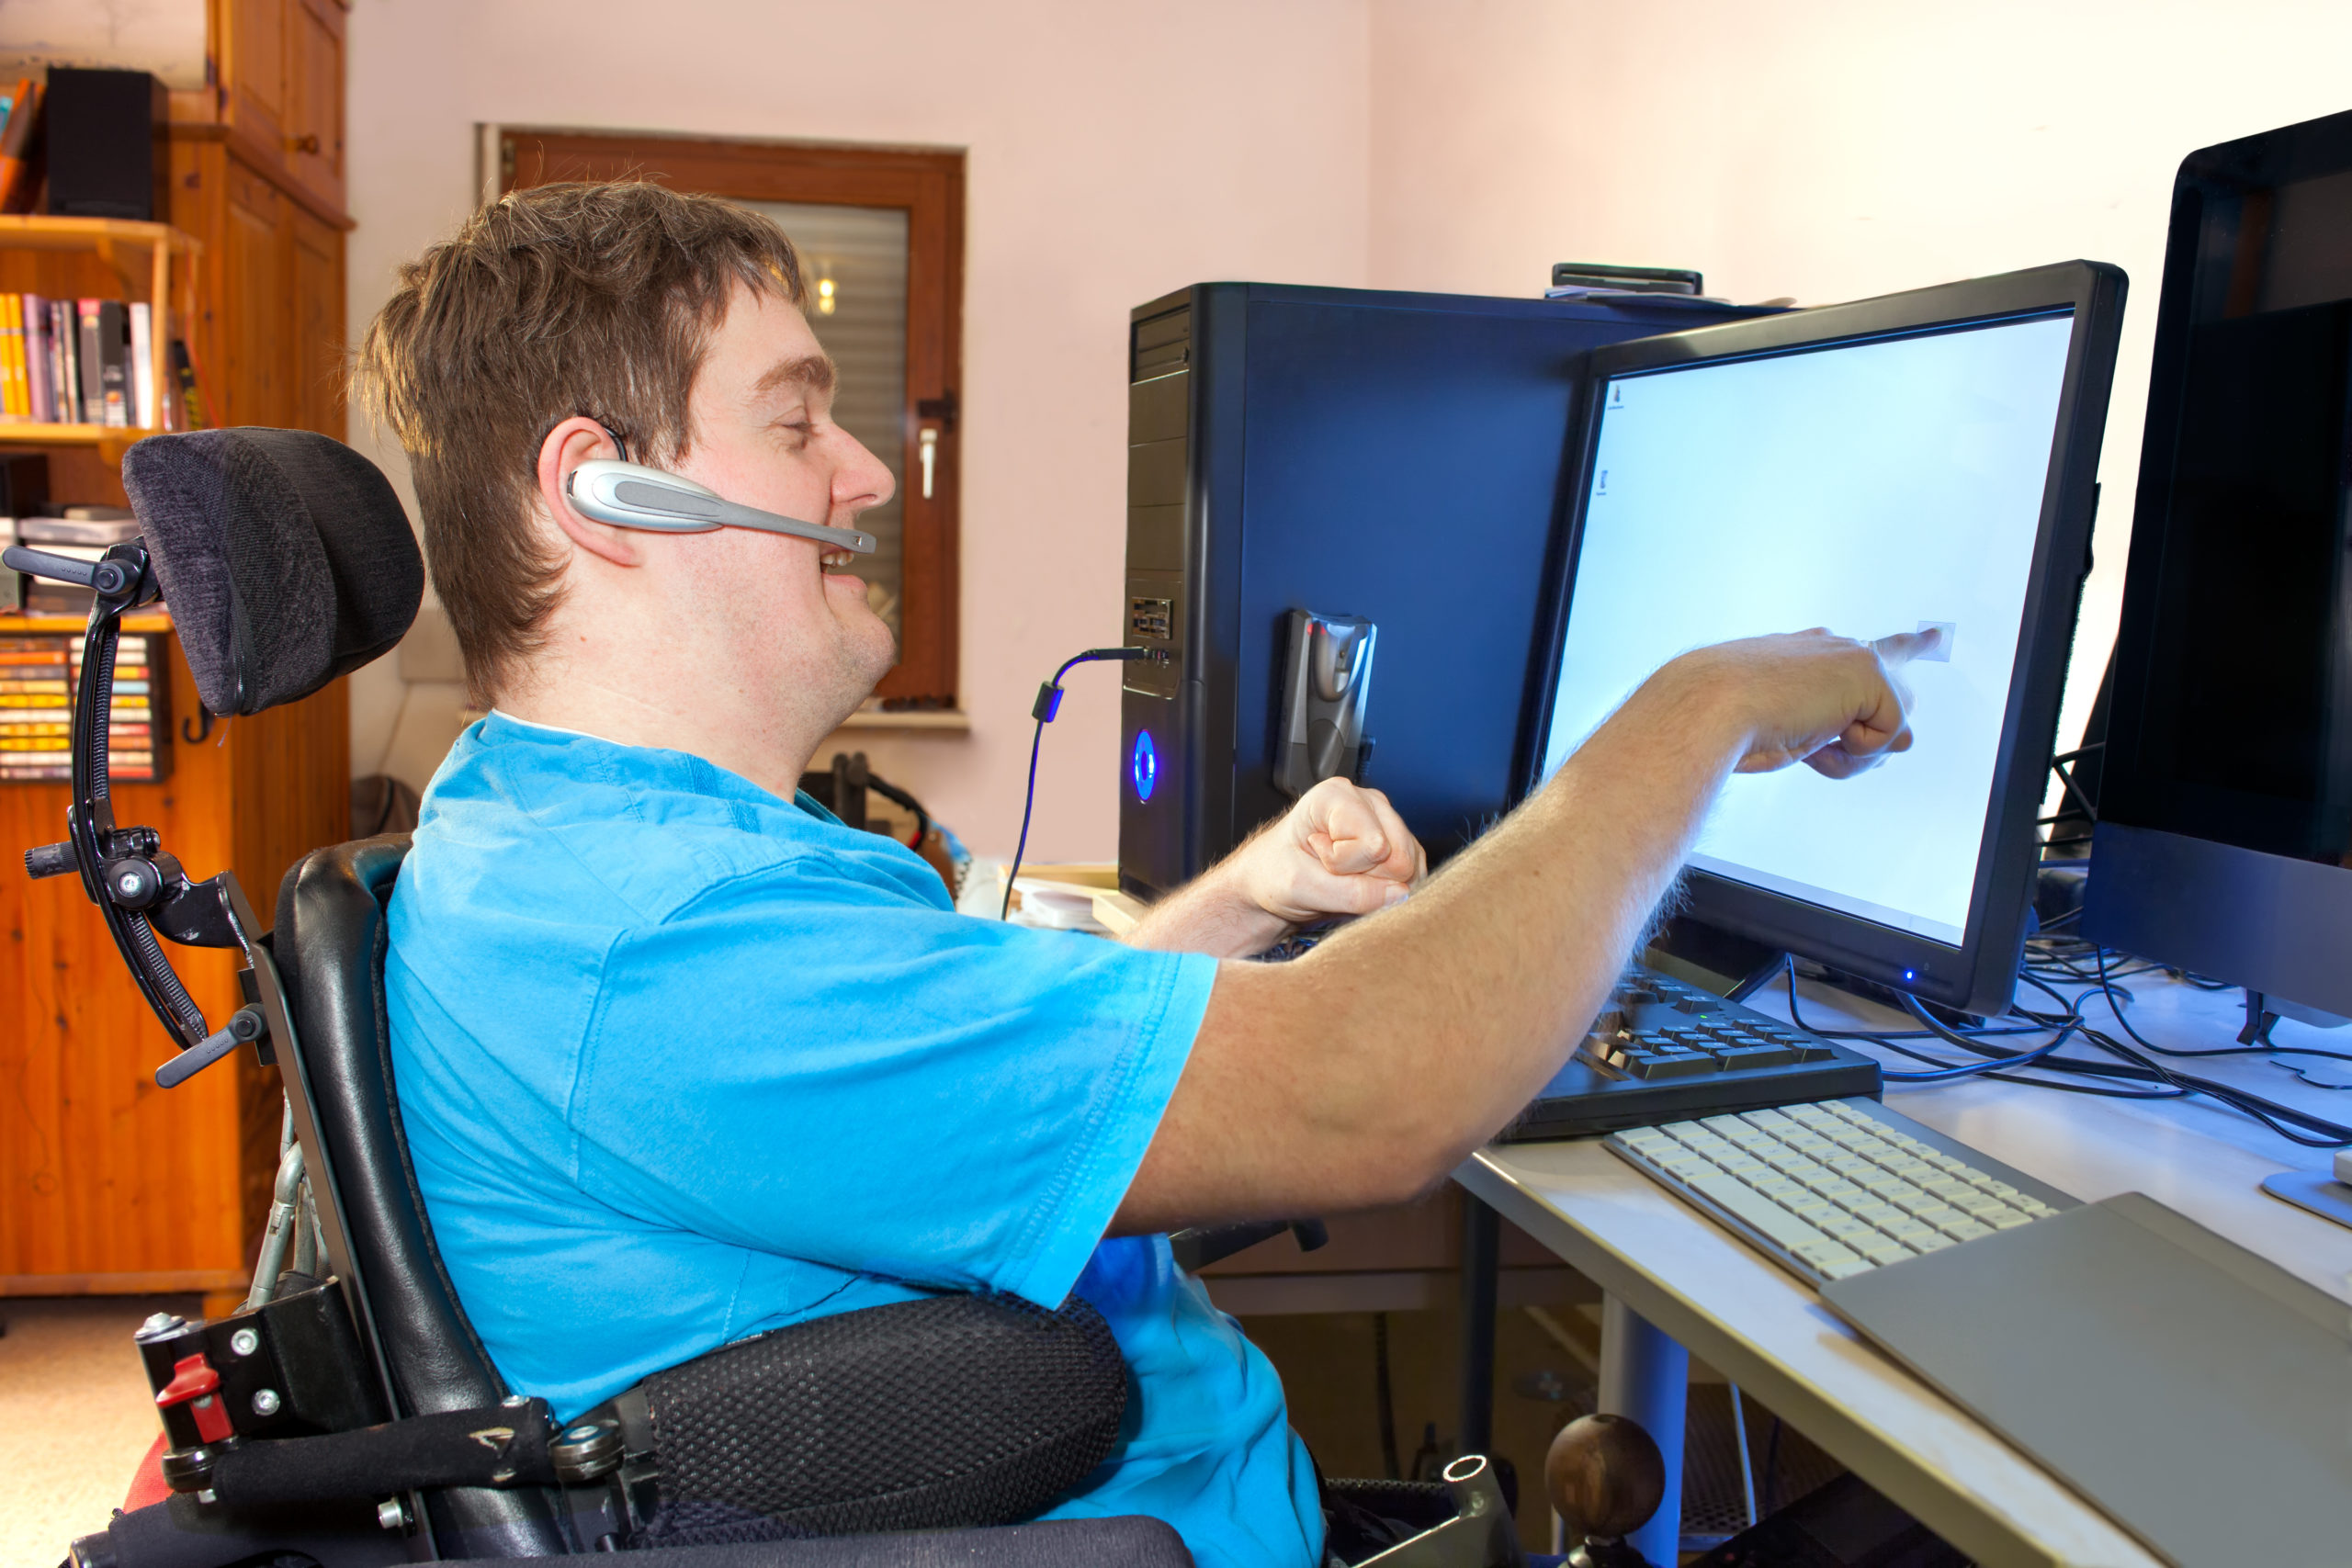 Young disabled man with cerebral palsy sitting in a powerchair using a computer with a wireless headset reaching out to touch the computer screen